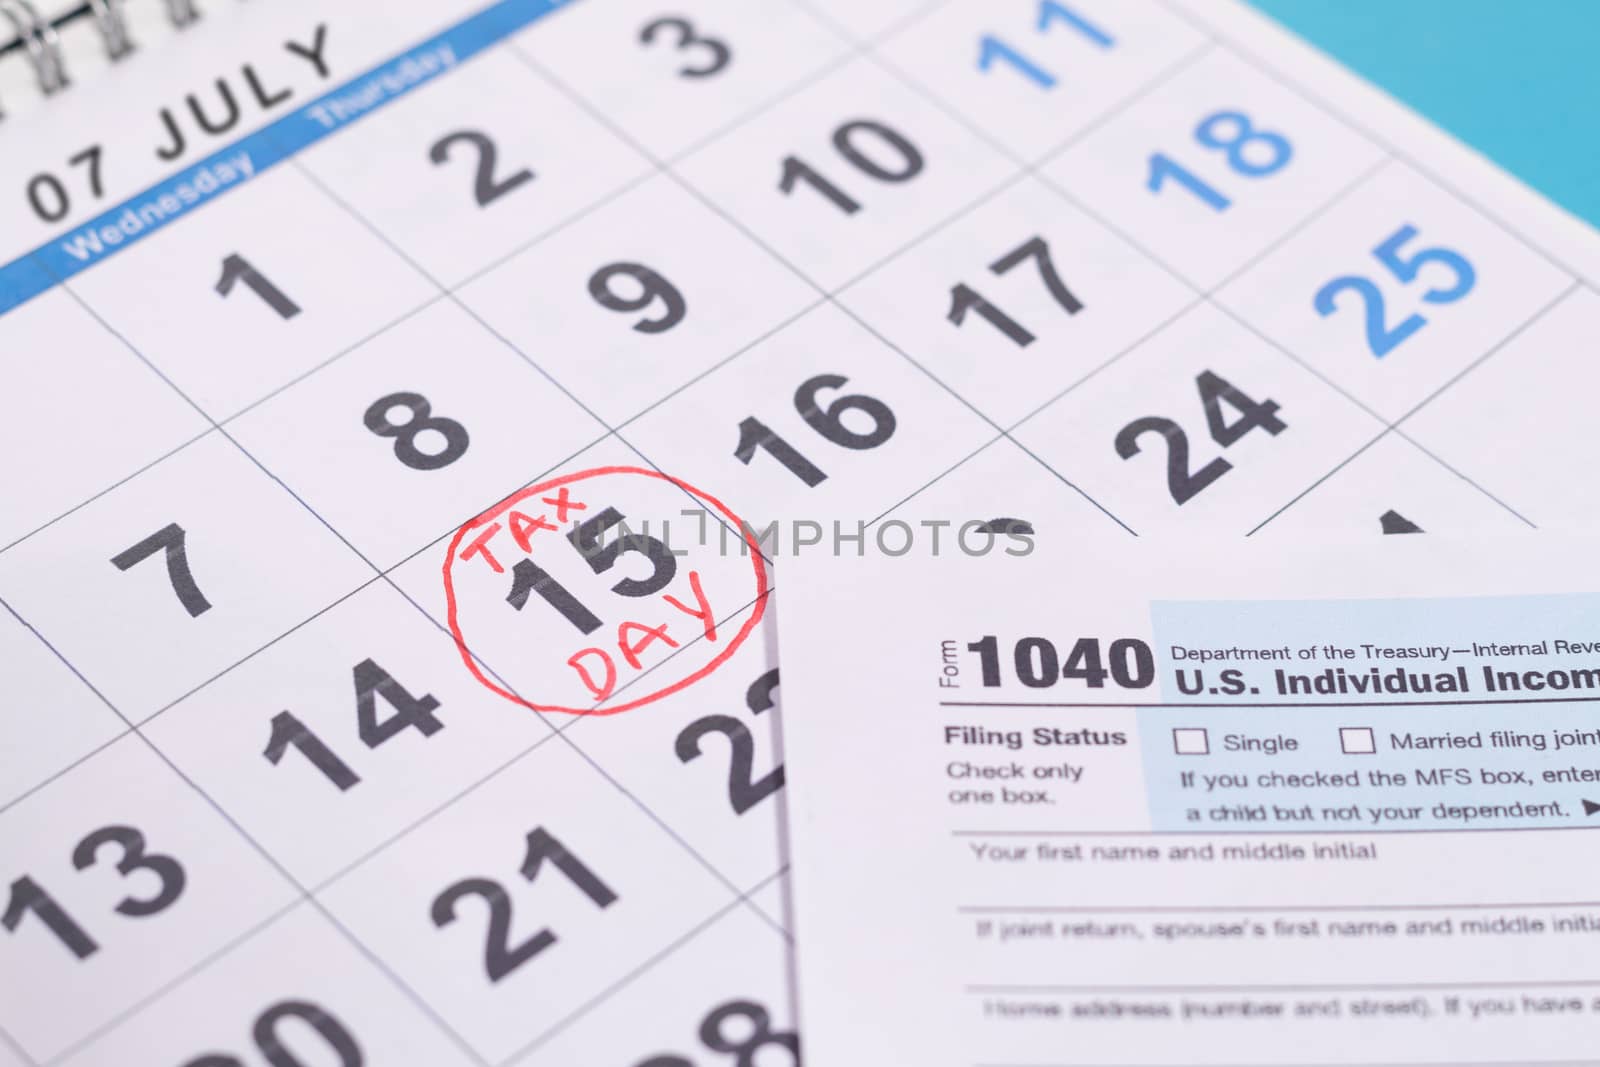 July 15th marked as tax day on calendar with Tax from - Concept of file tax form before deadline july 15th by lakshmiprasad.maski@gmai.com